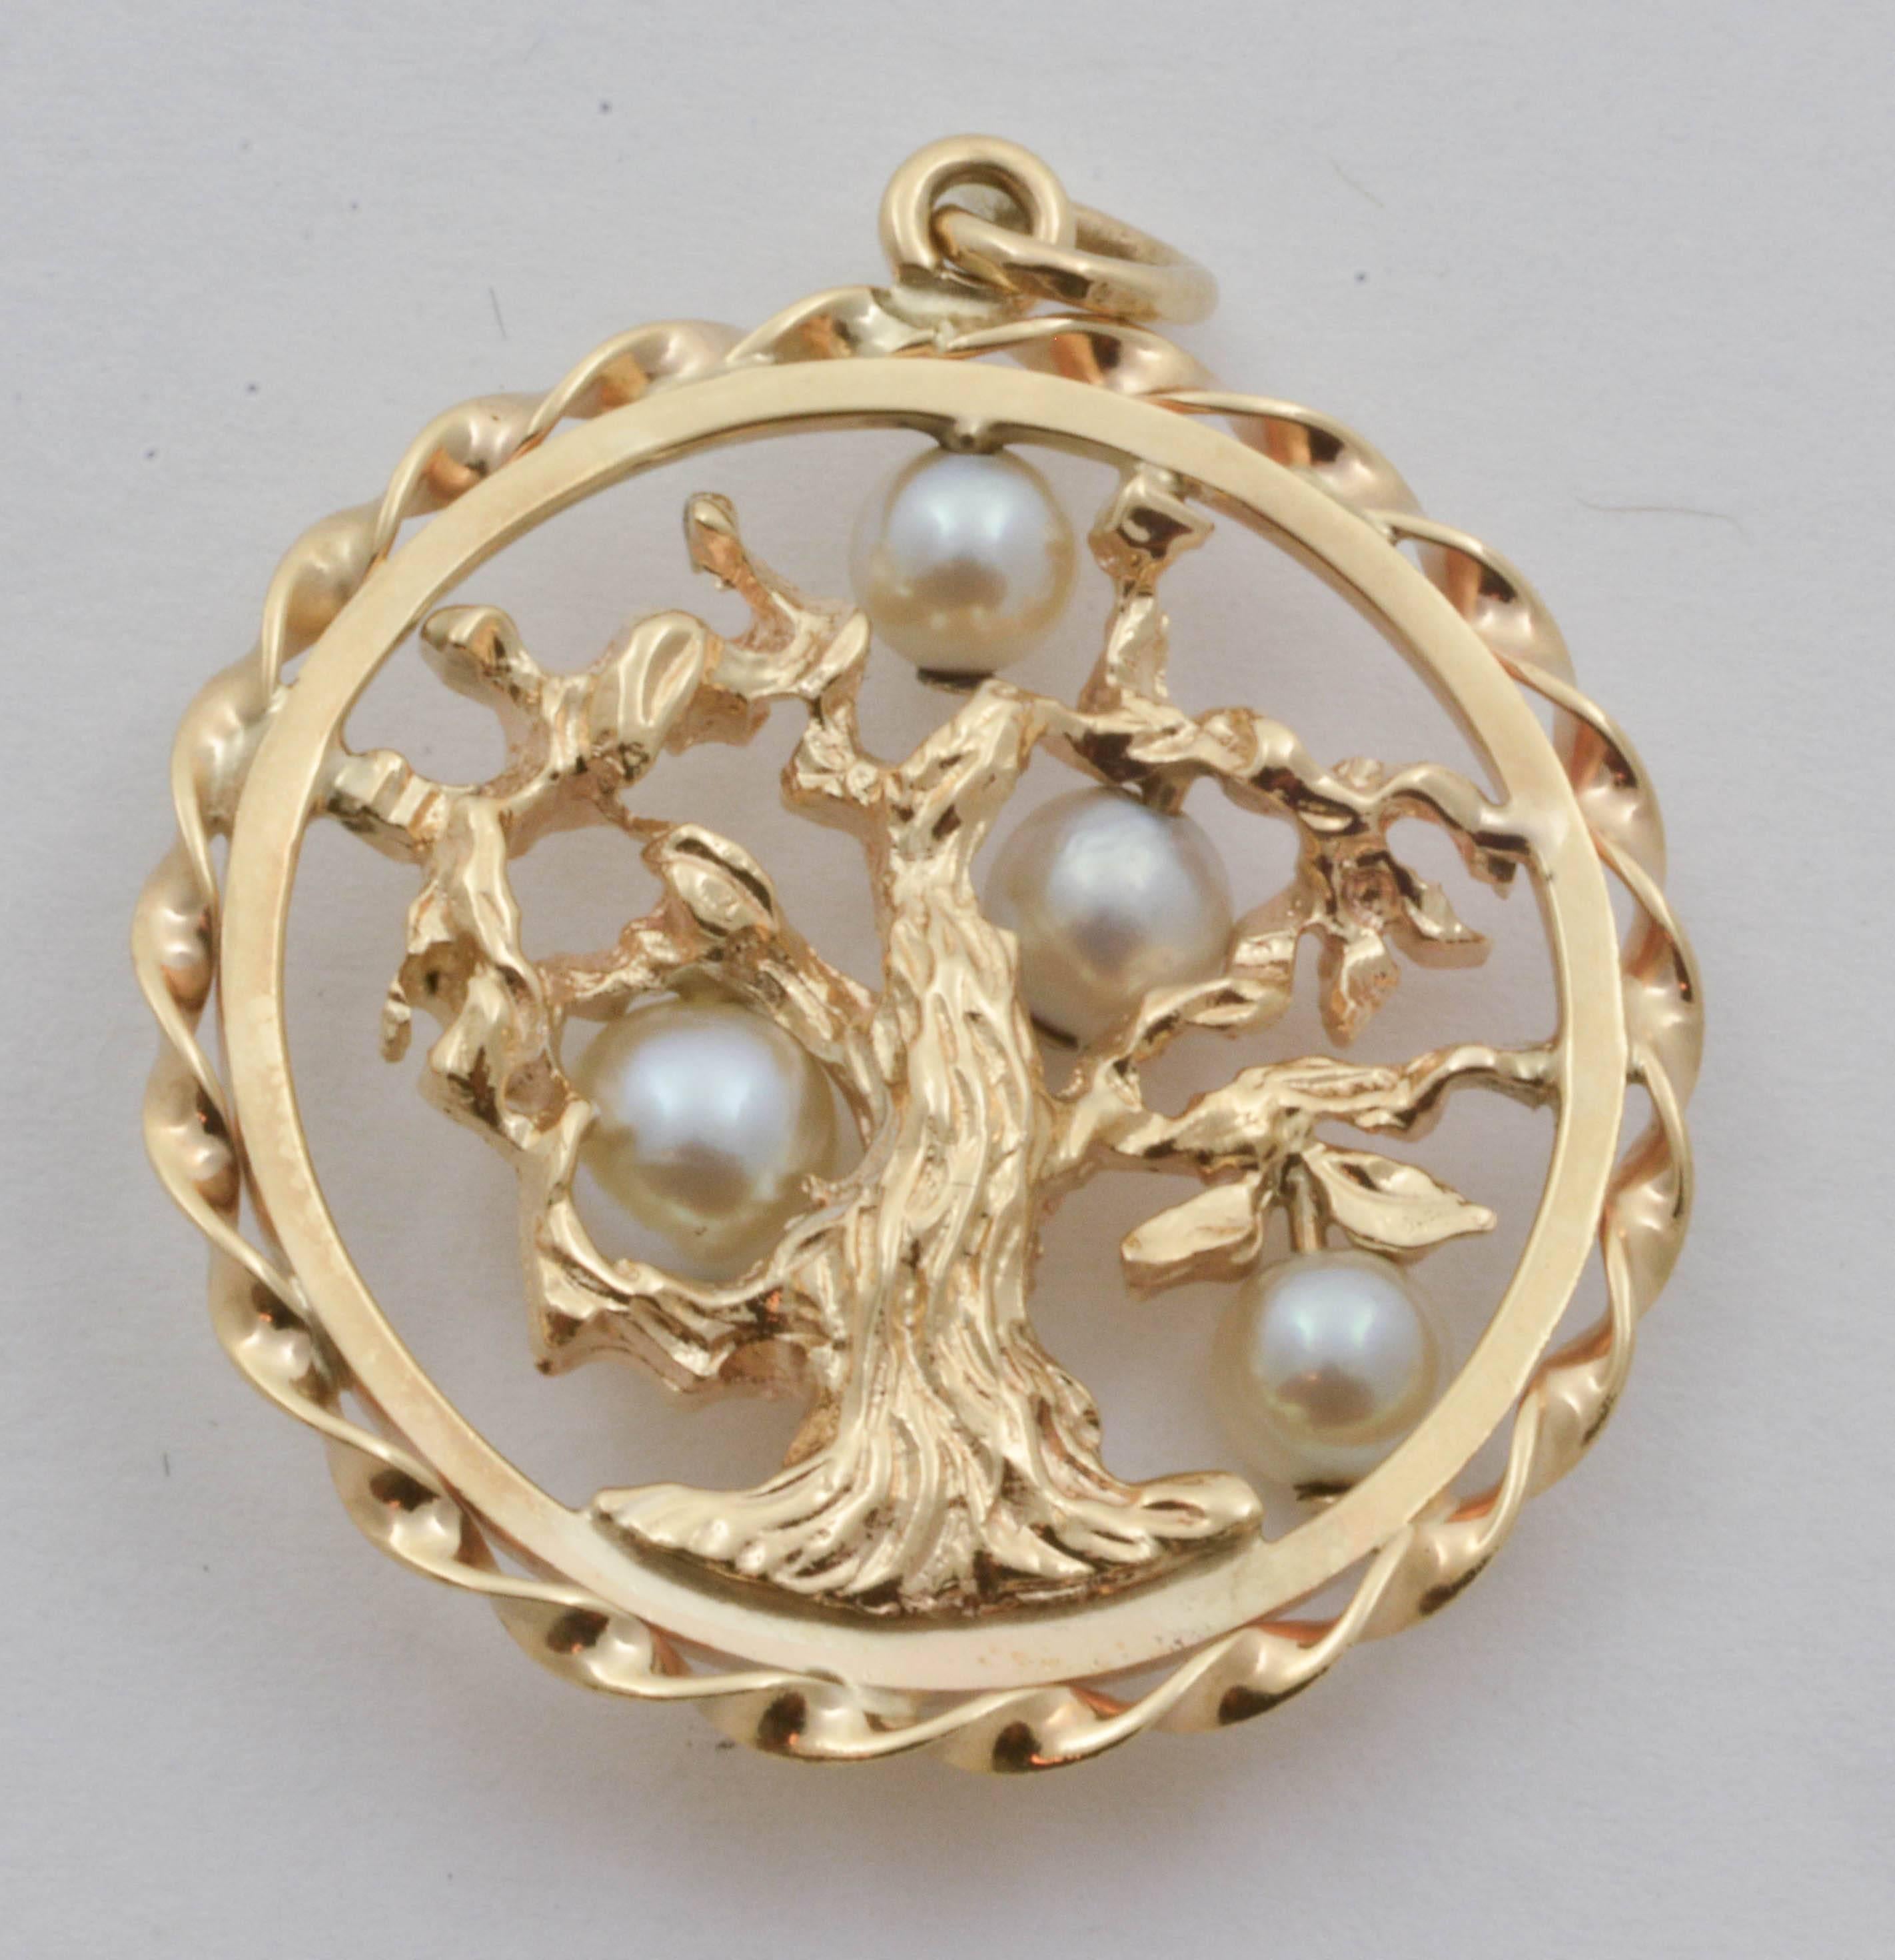 A beautifully artistic rendering of a gnarled tree is set in this pendant with four round cultured pearls. Fashioned from yellow gold and framed with both a flat band and a twisted ribbon border, this piece is a remarkably unique pendant that is